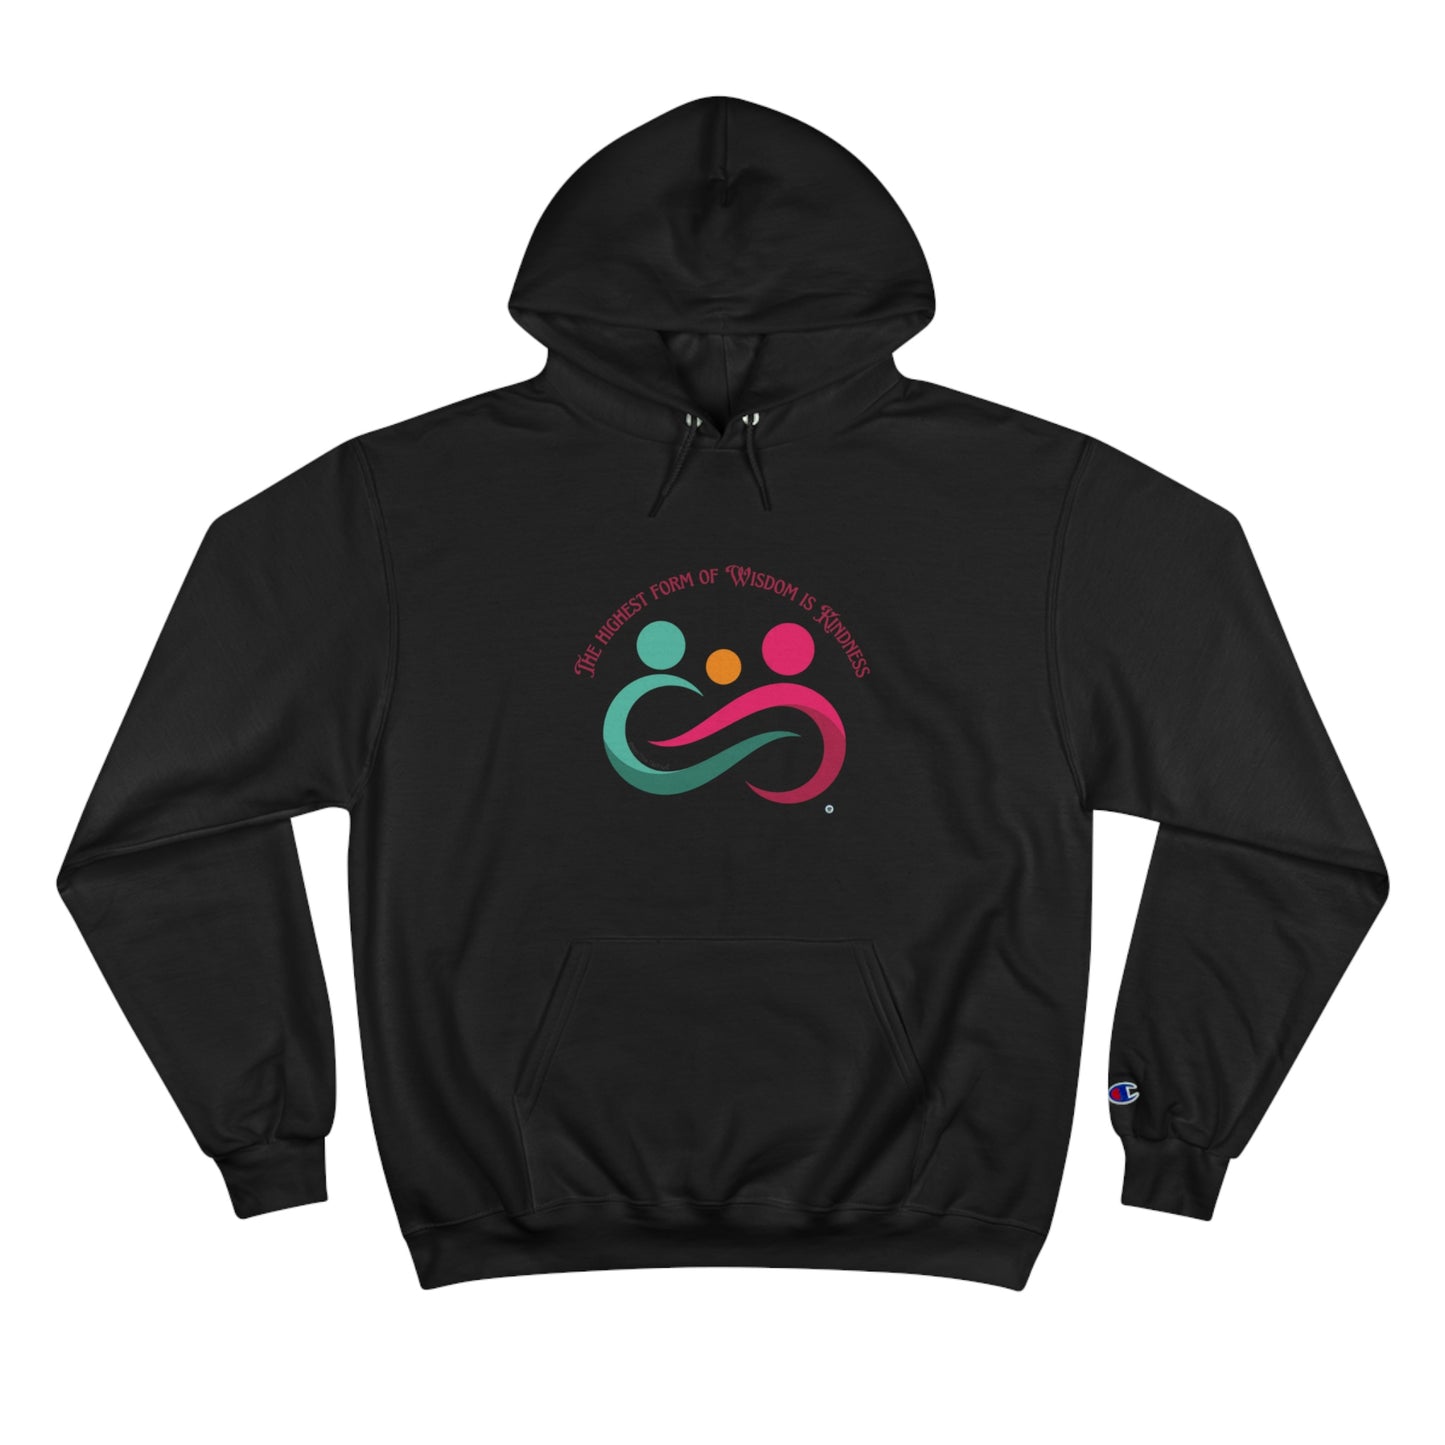 ‘The highest form of wisdom is kindness’  Champion Hoodie